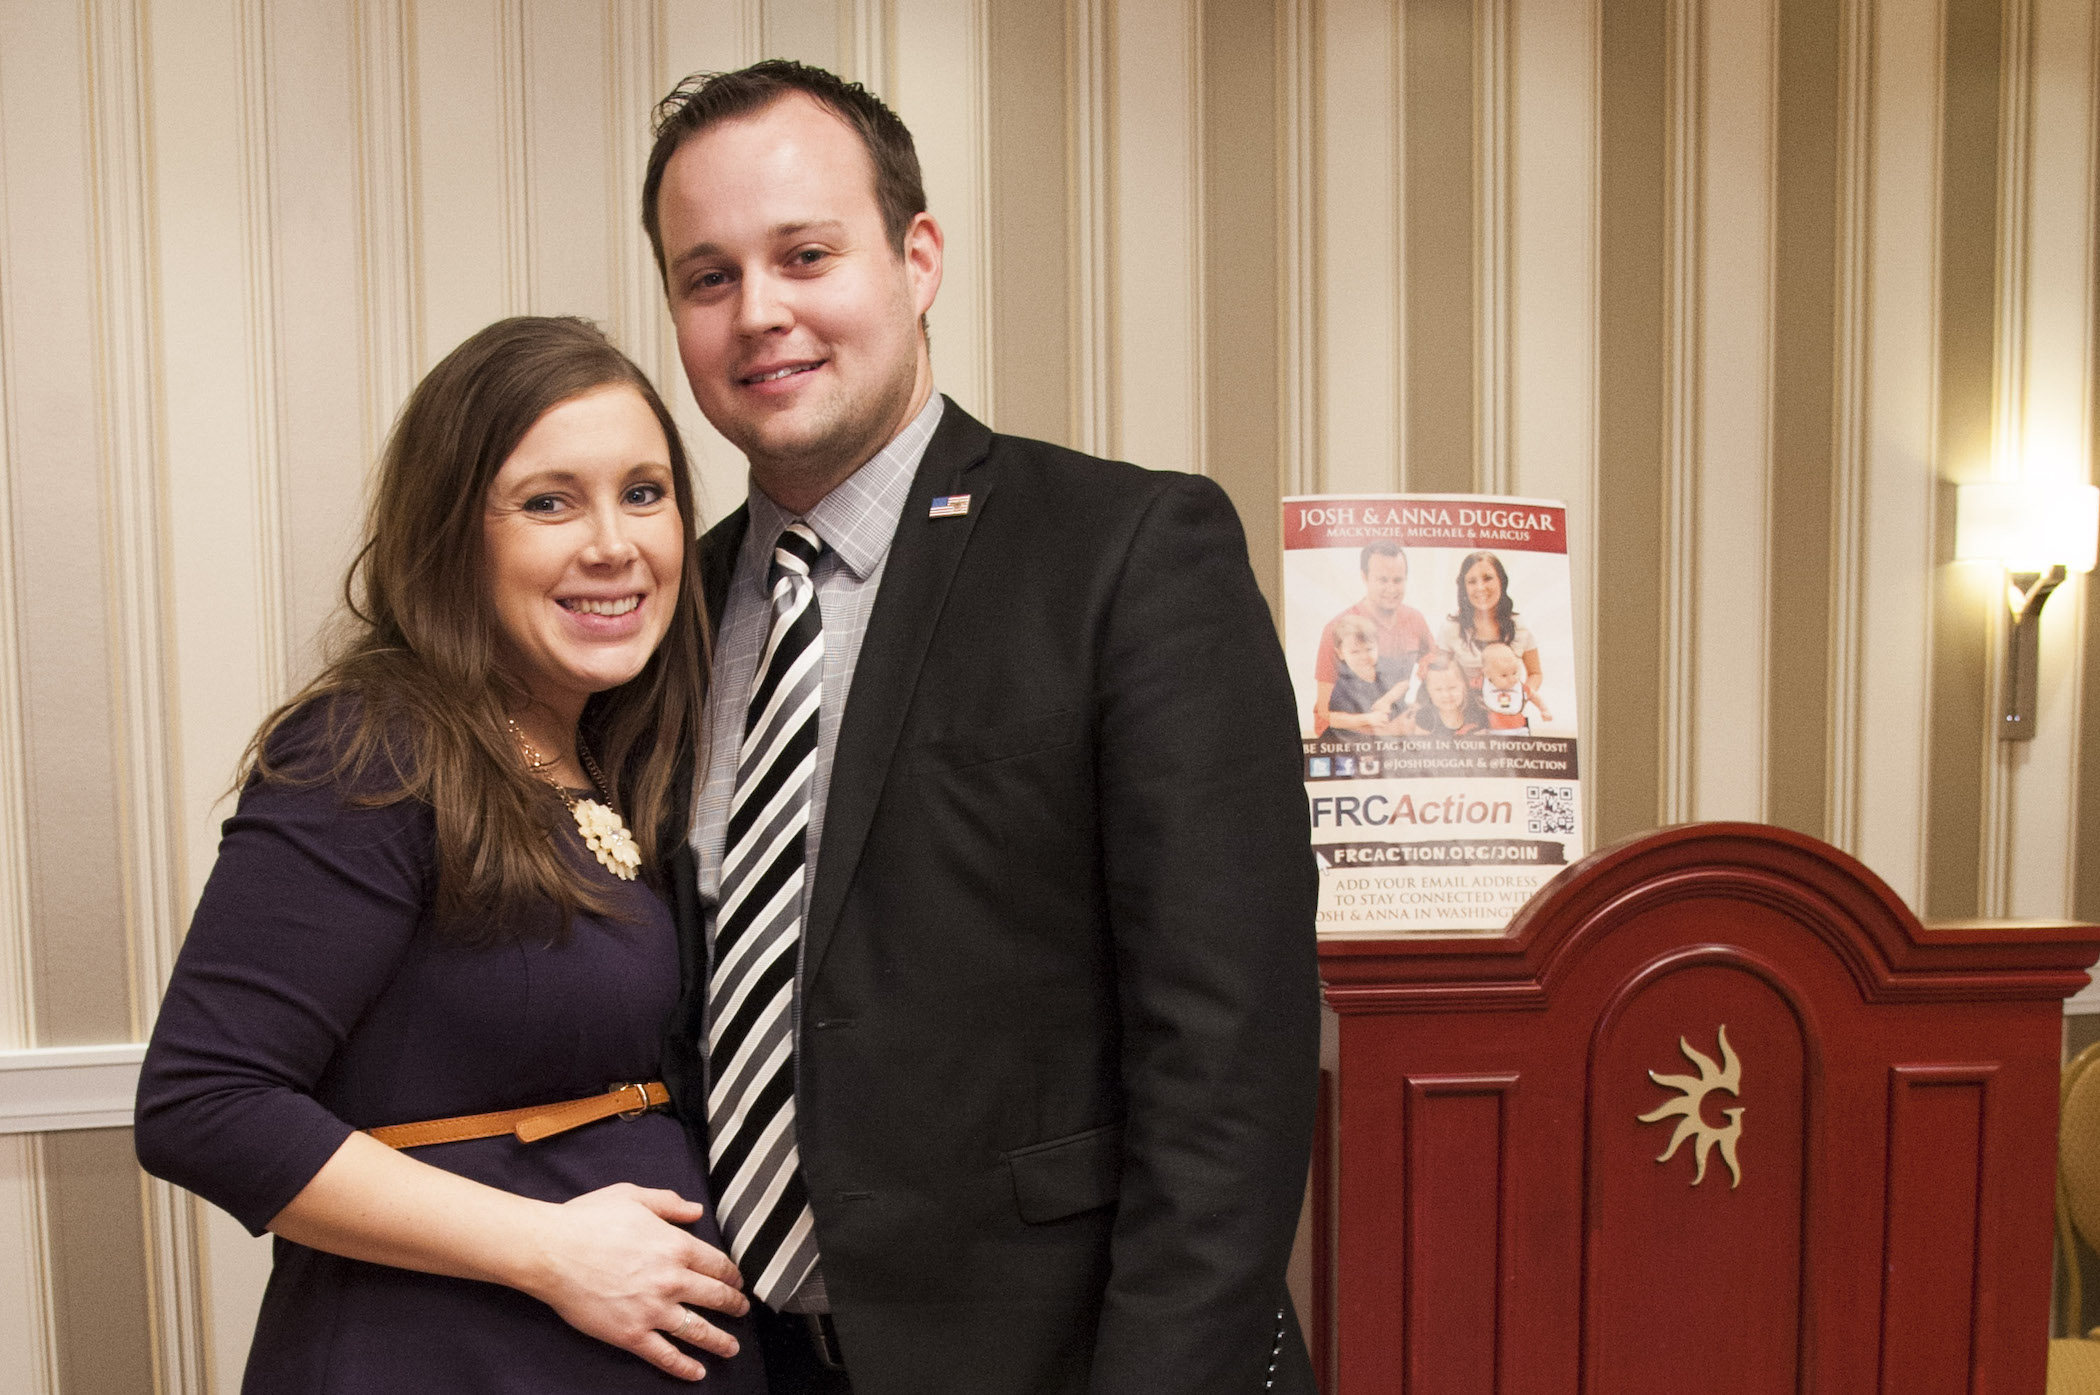 Anna Duggar and Josh Duggar standing with each other and smiling at an event. Anna Duggar's hand is on her pregnant belly